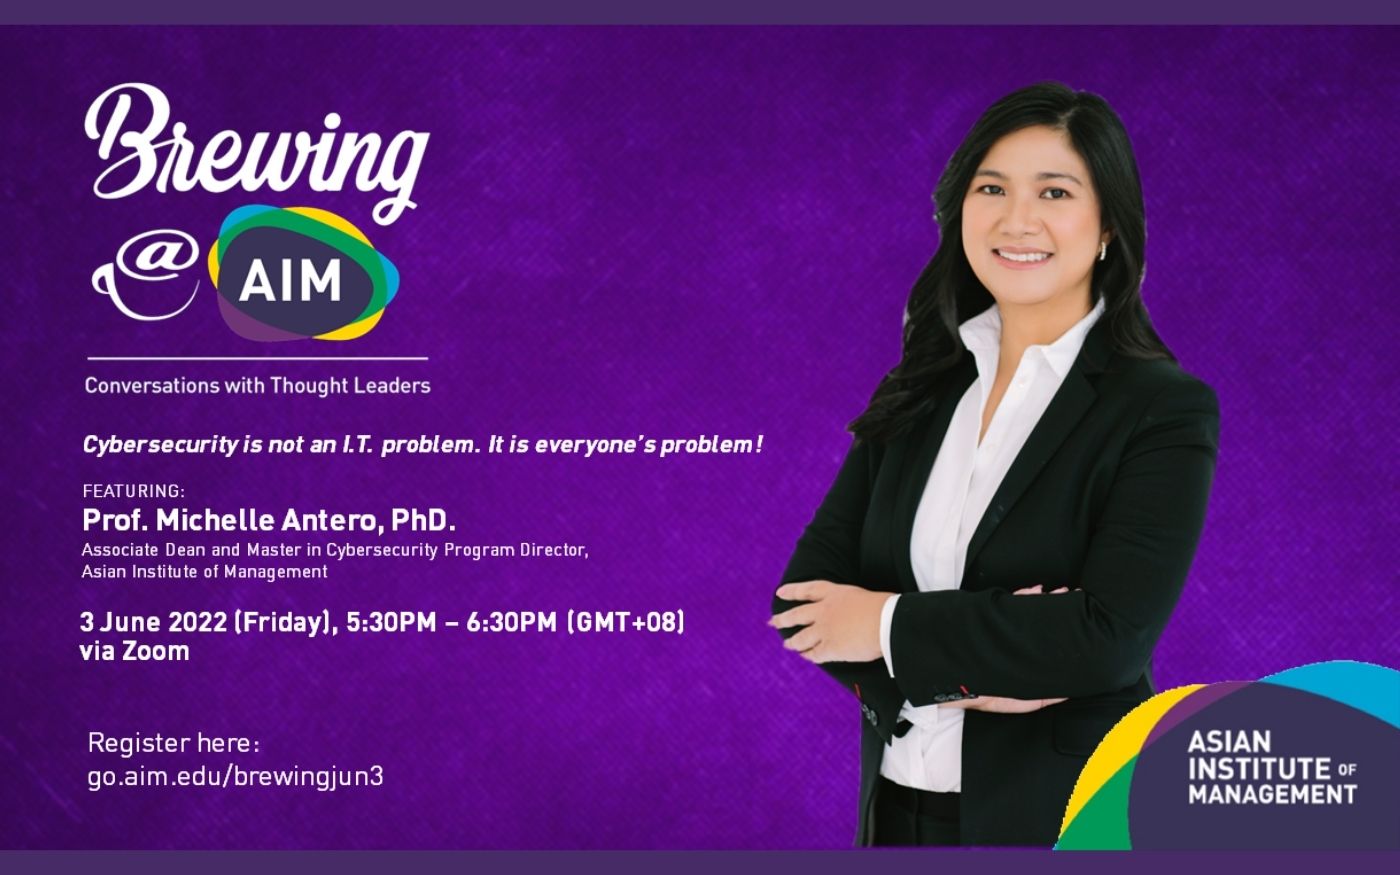 Brewing@AIM with Prof. Michelle Antero, PhD